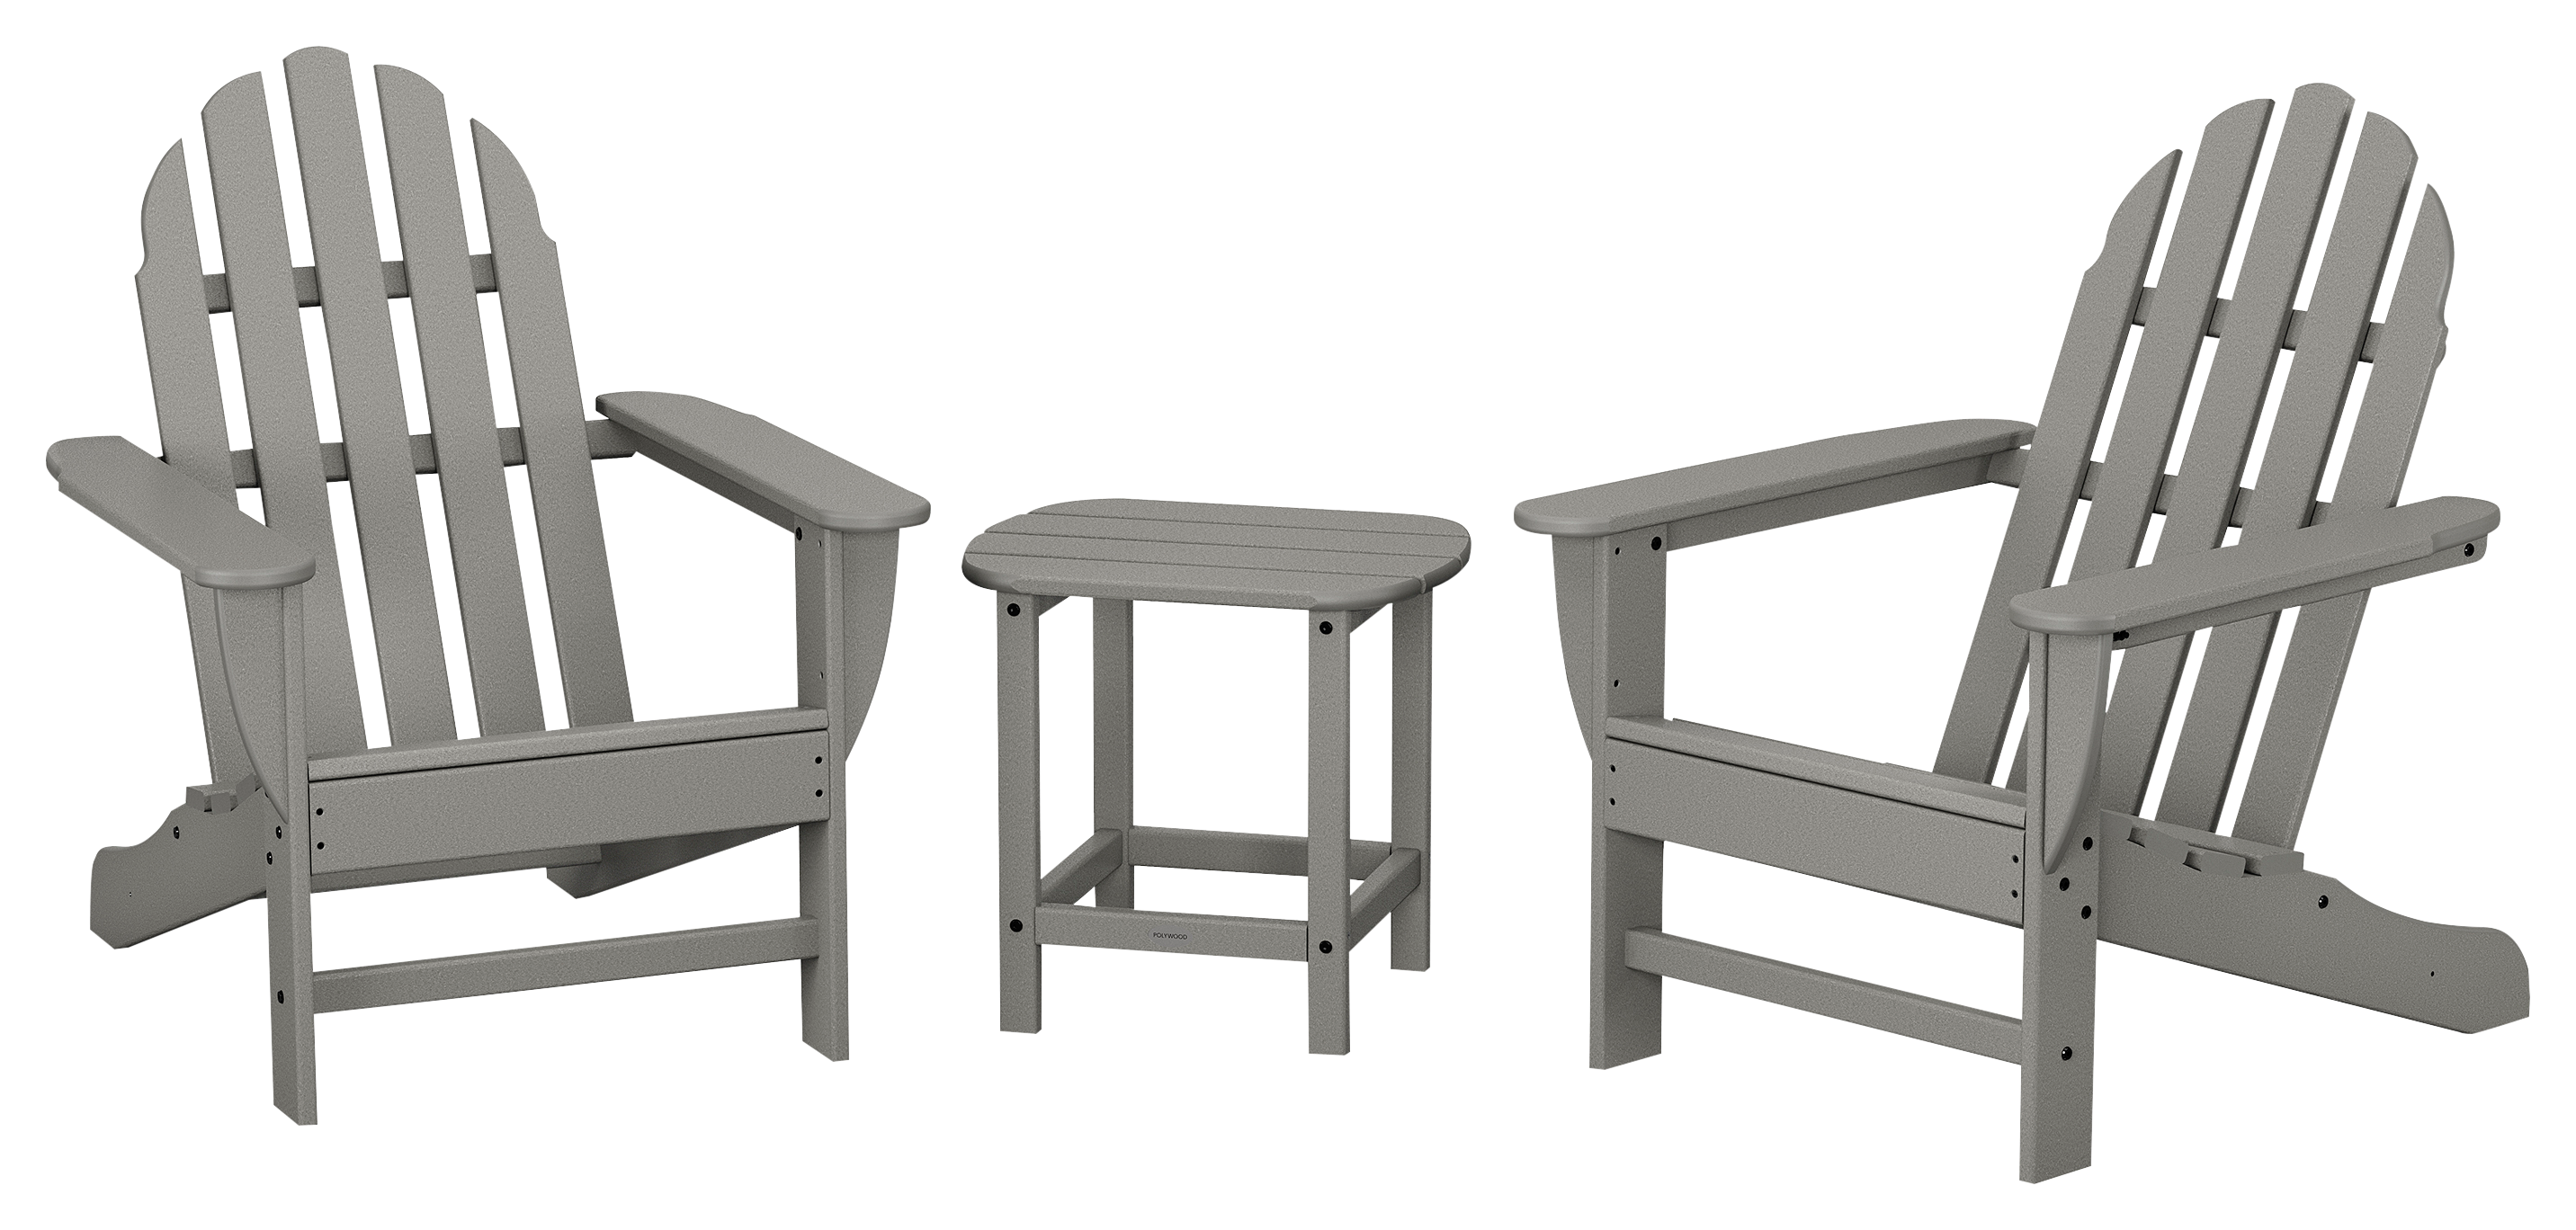 POLYWOOD Classic Adirondack 3-Piece Set with South Beach Side Table - Slate Grey